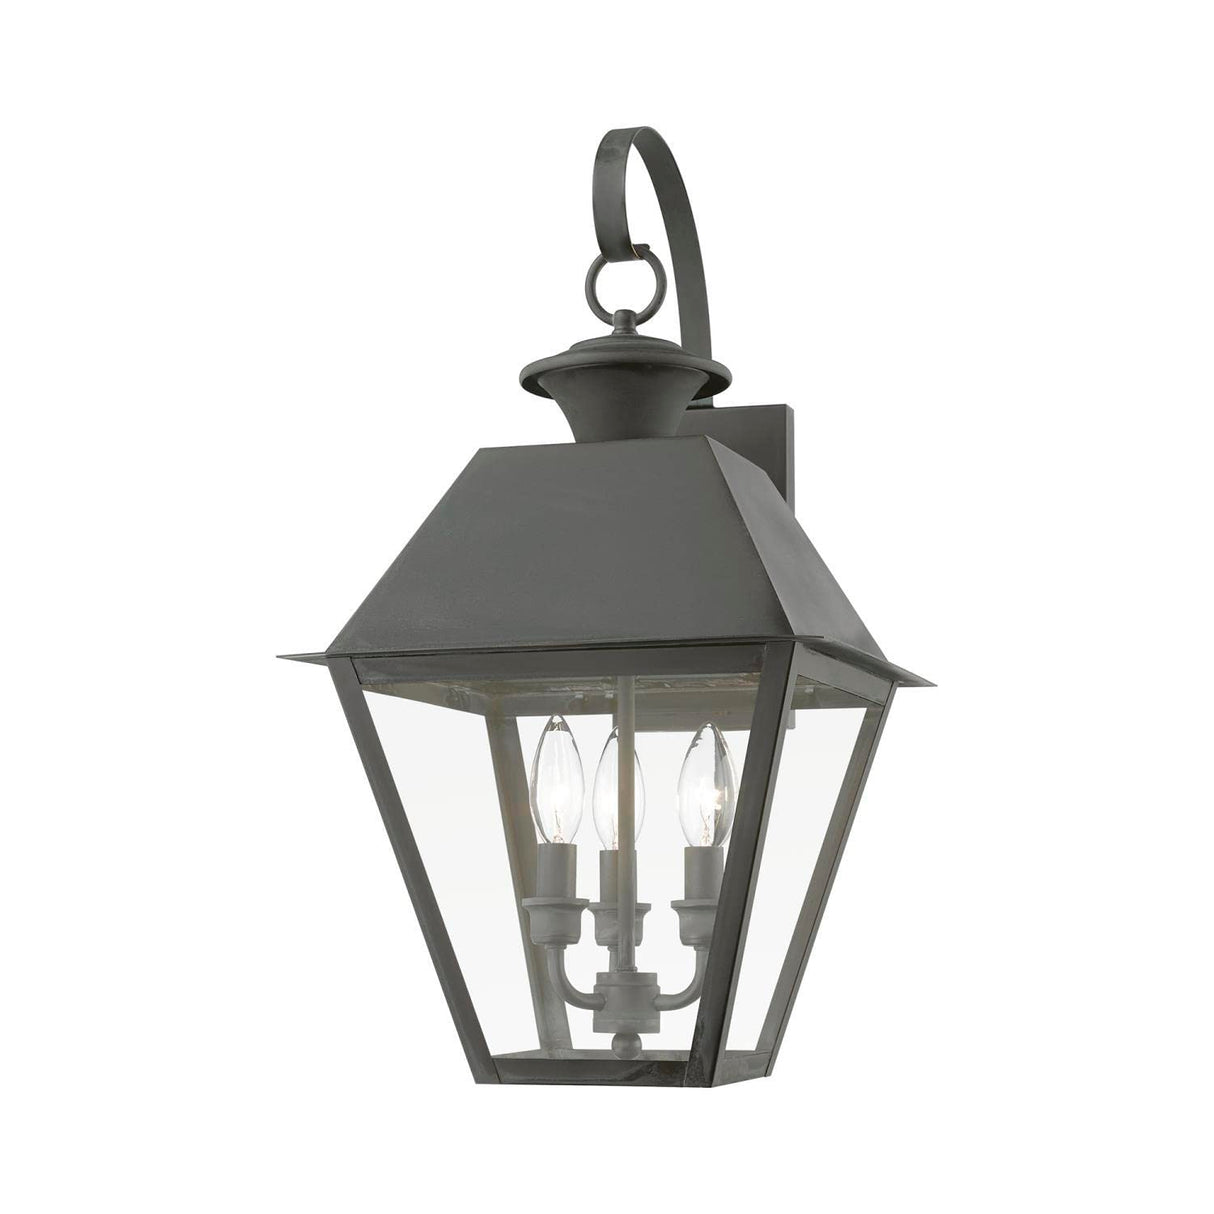 Livex Lighting 27218-61 Wentworth 3 Light 22 inch Charcoal Outdoor Wall Lantern, Large